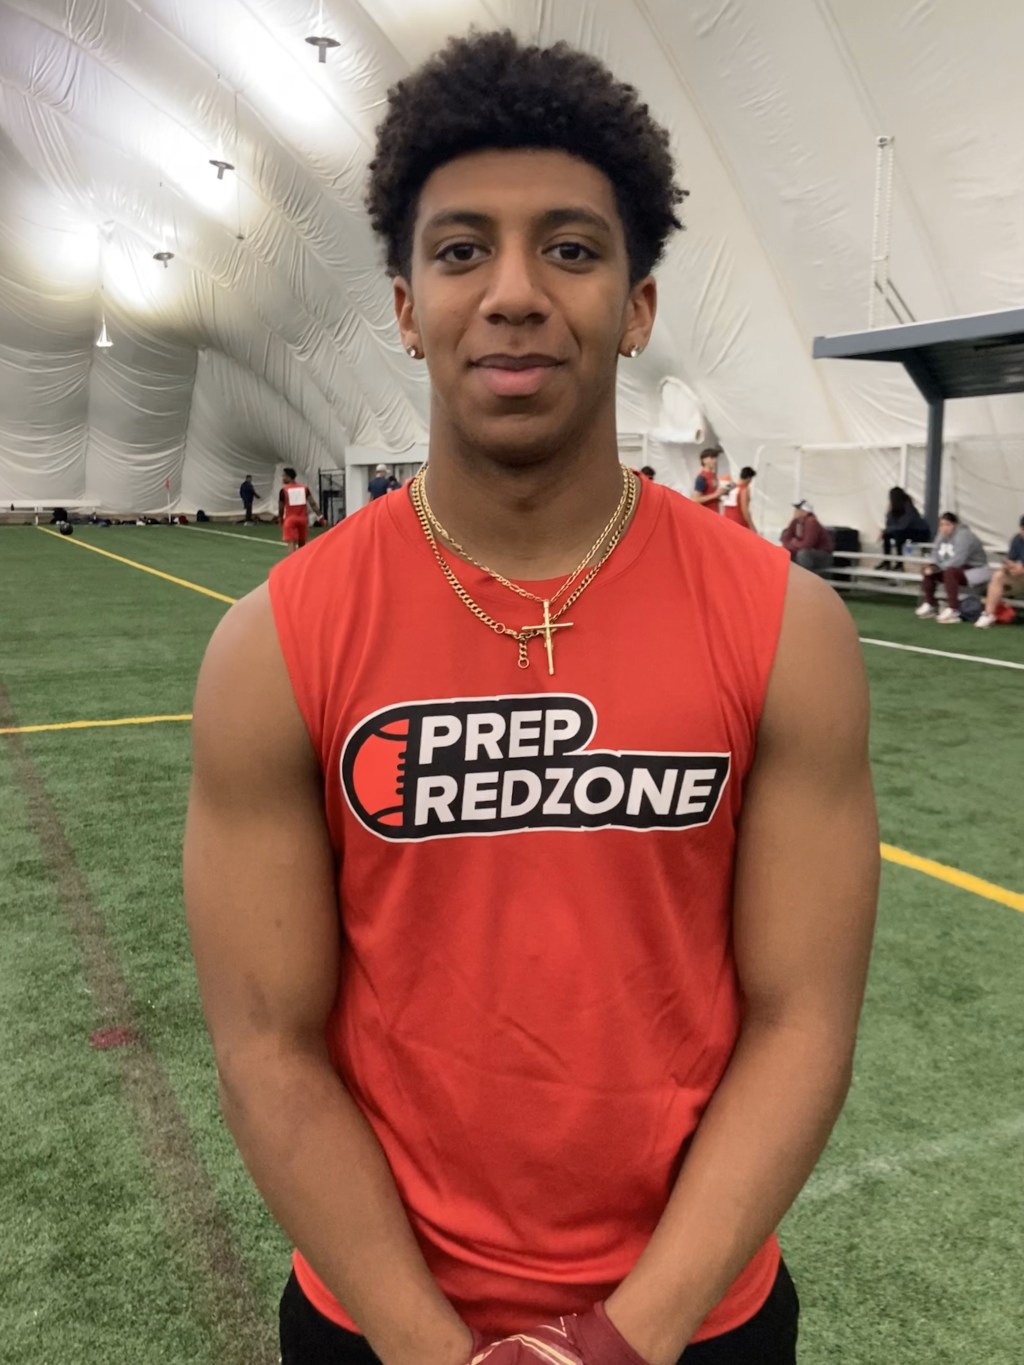 RBs That Shined at PRZ NYNJ Combine